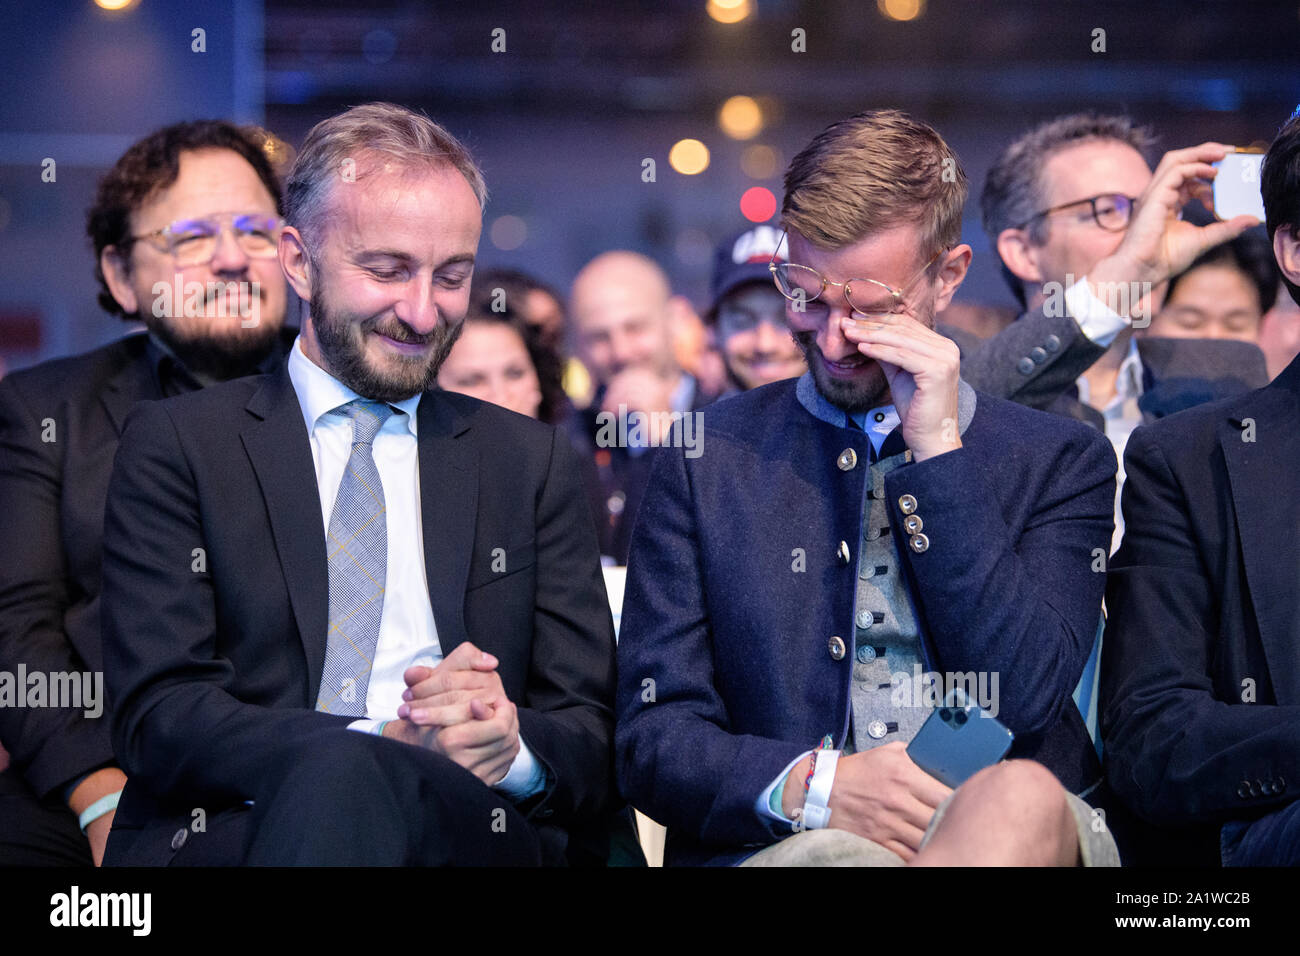 Munich, Germany. 29th Sep, 2019. Jan Böhmermann (l), TV entertainer, and  Joko Winterscheidt, TV presenter, smile during the opening speech of the  company's founder and investor meeting Bits & Pretzels. At Bits